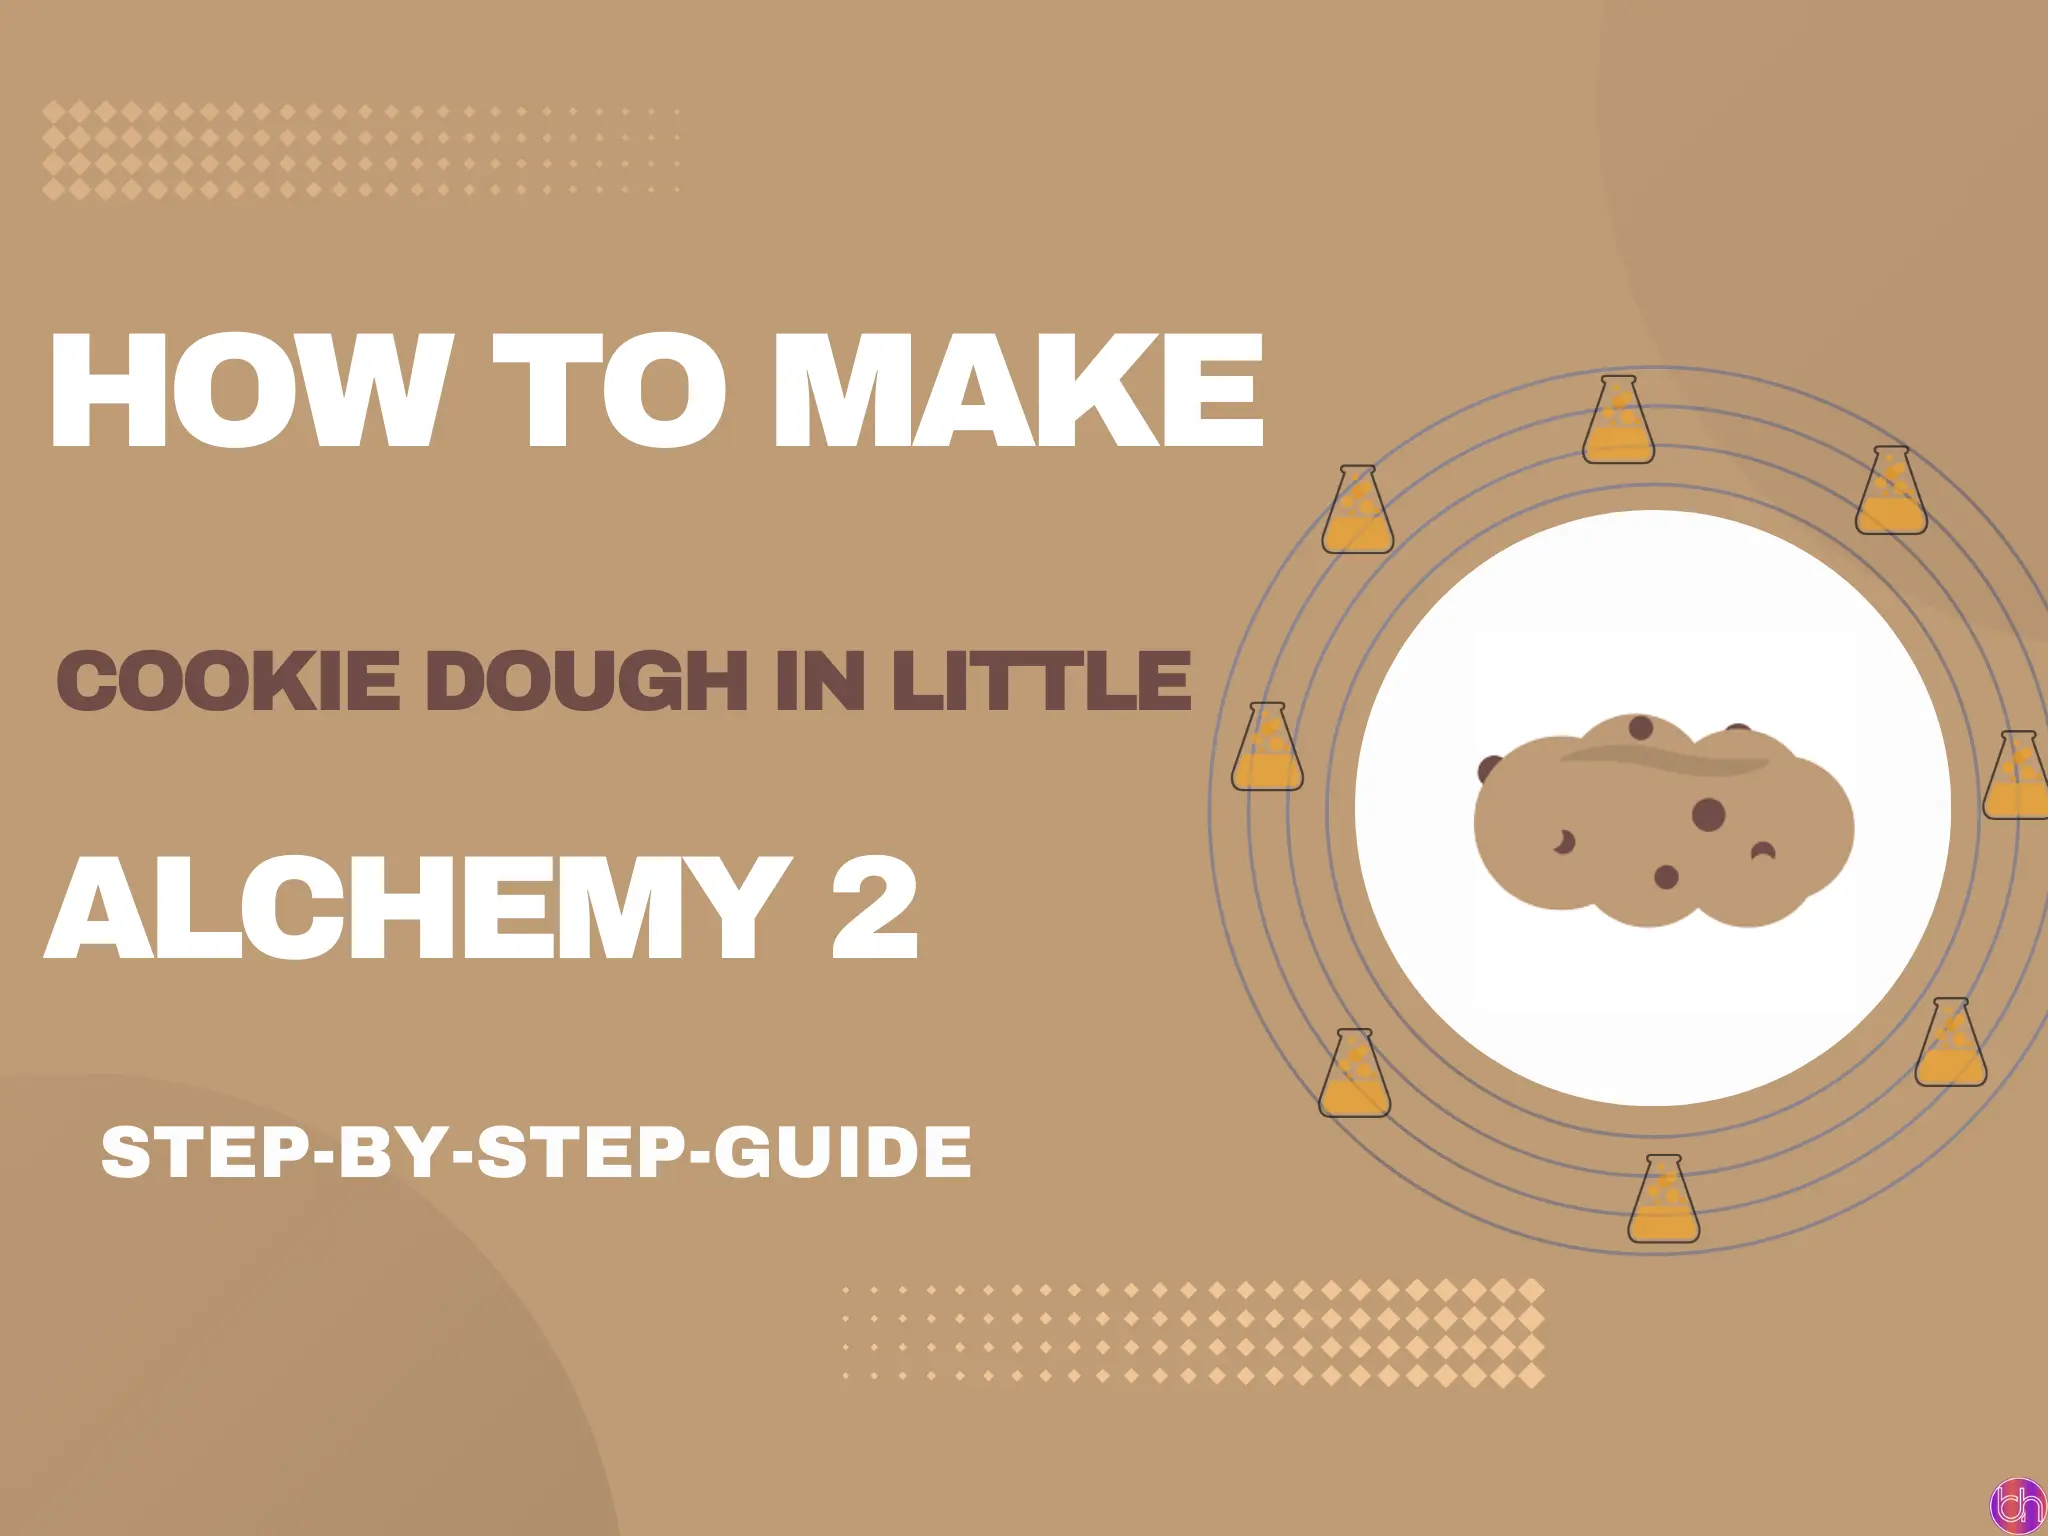 how to make Cookie dough in little alchemy 2